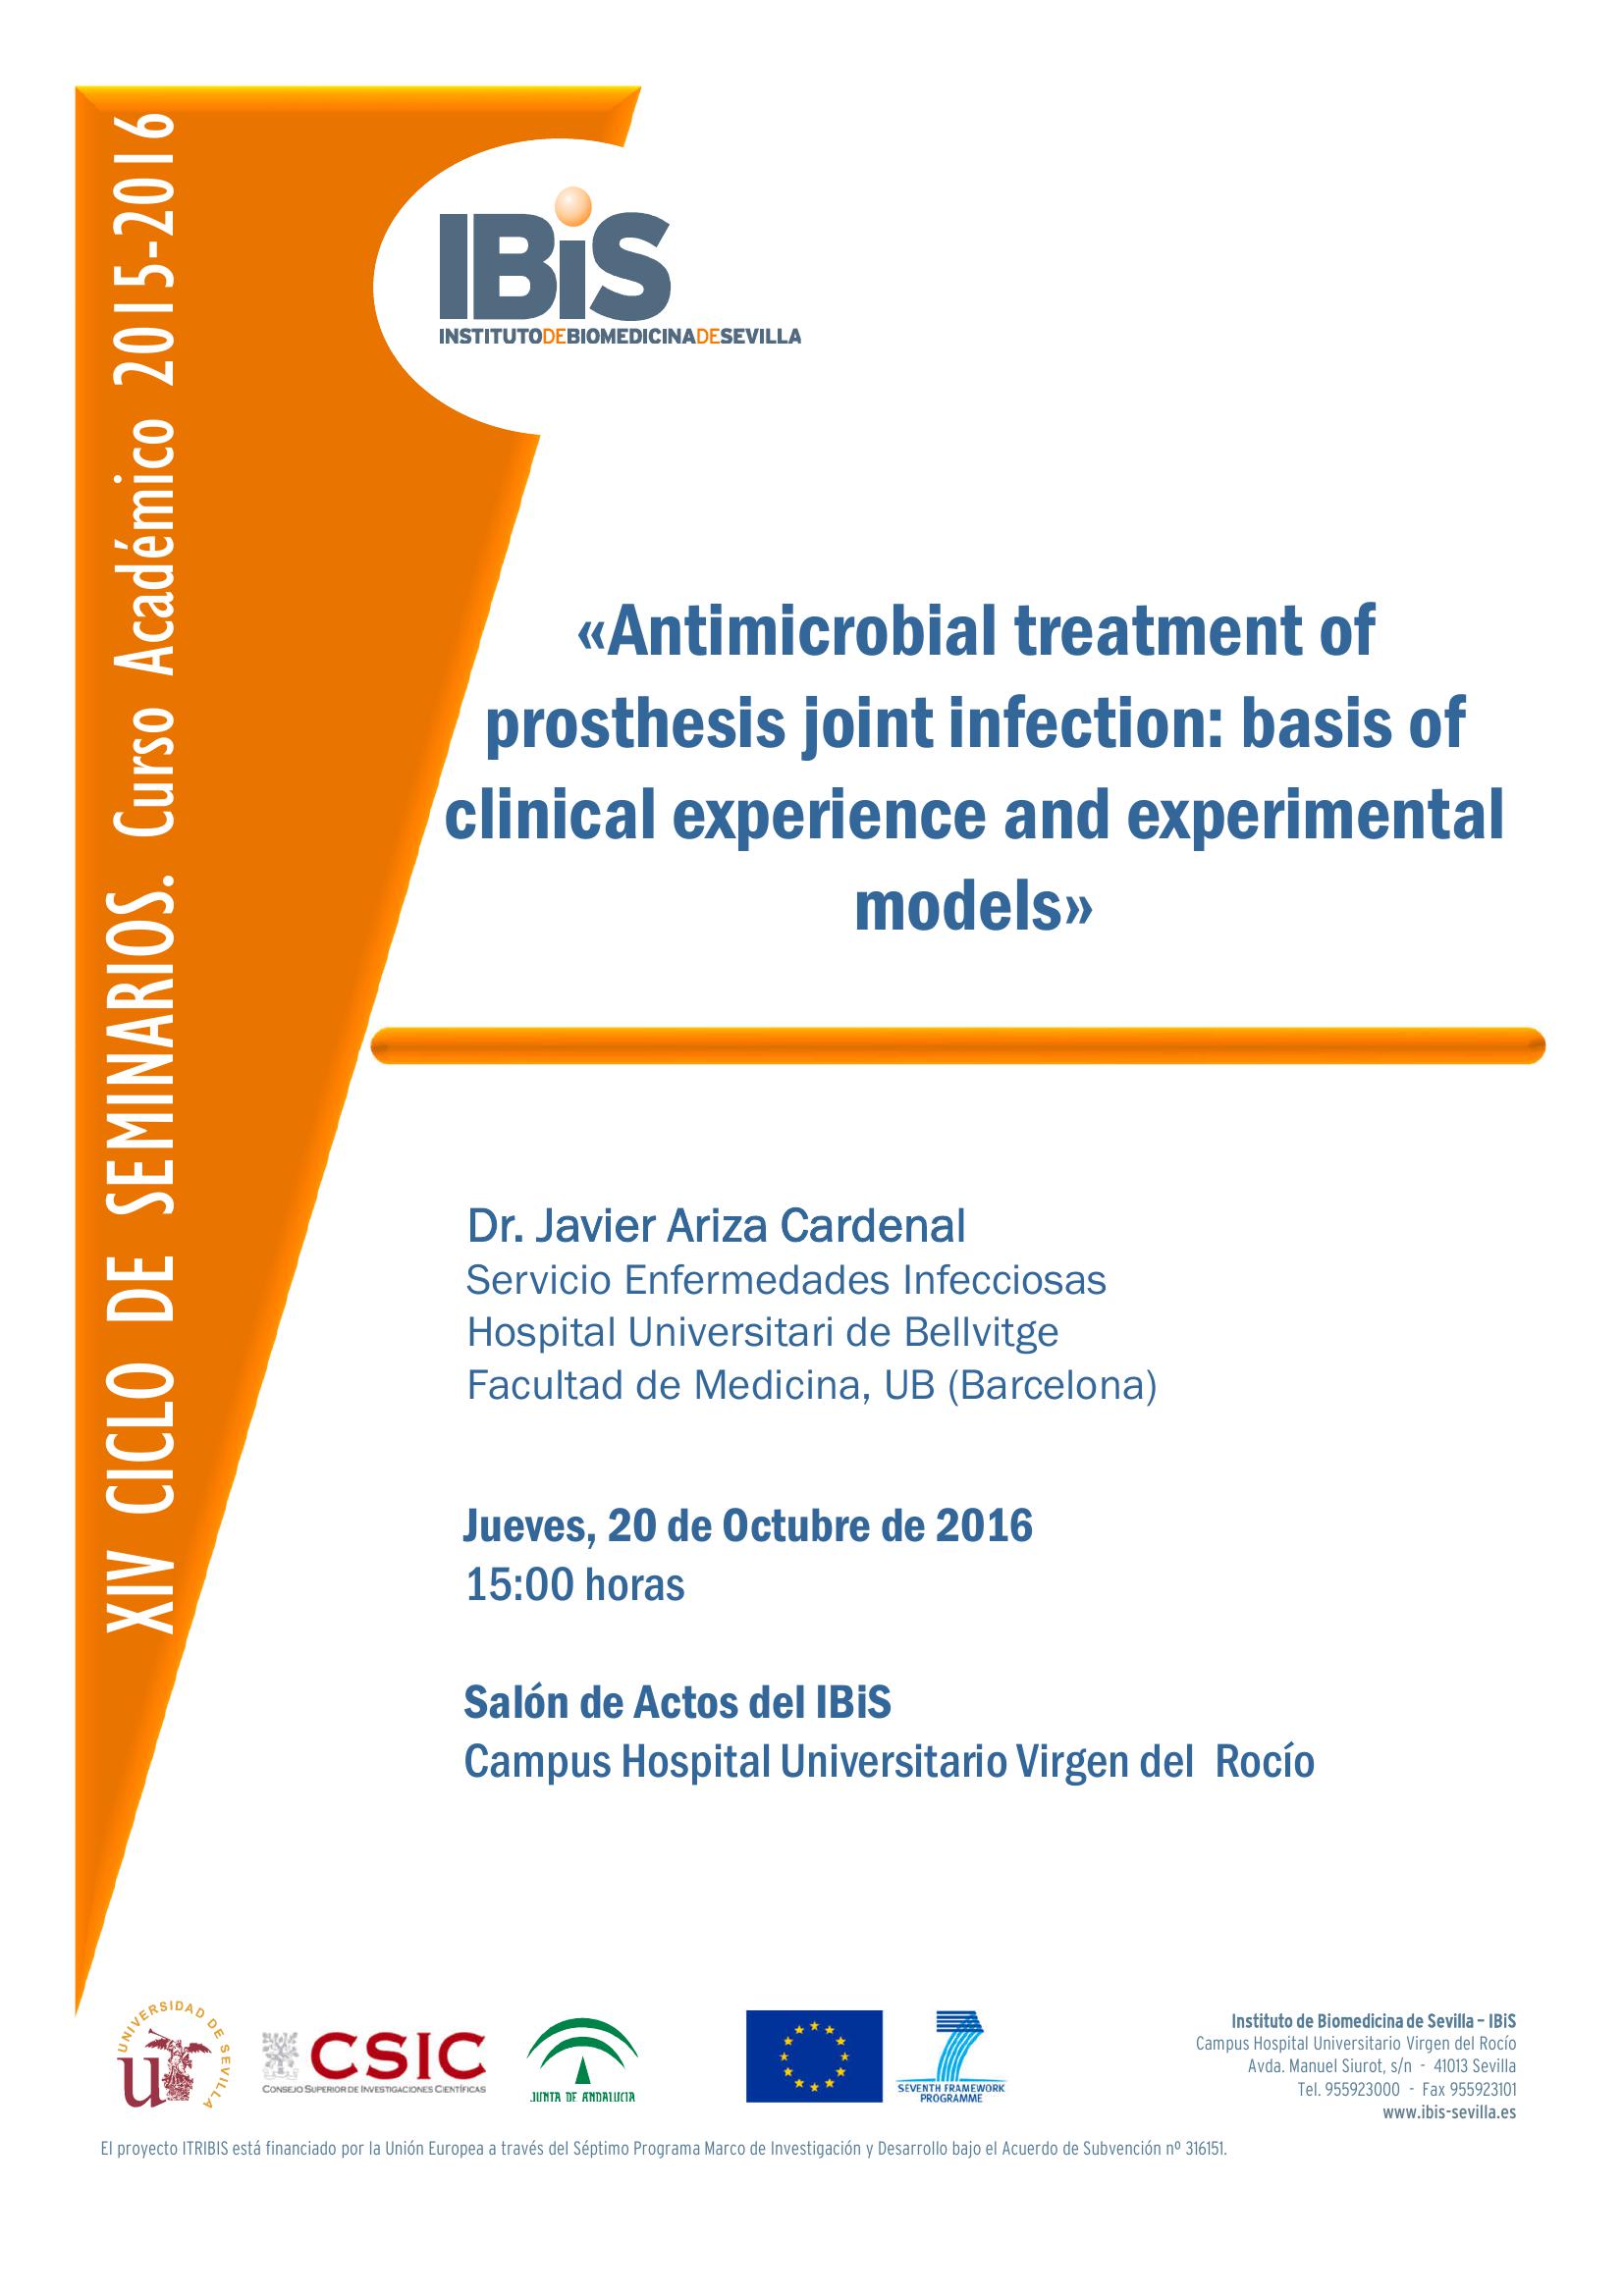 Poster: Antimicrobial treatment of prosthesis joint infection: basis of clinical experience and experimental models